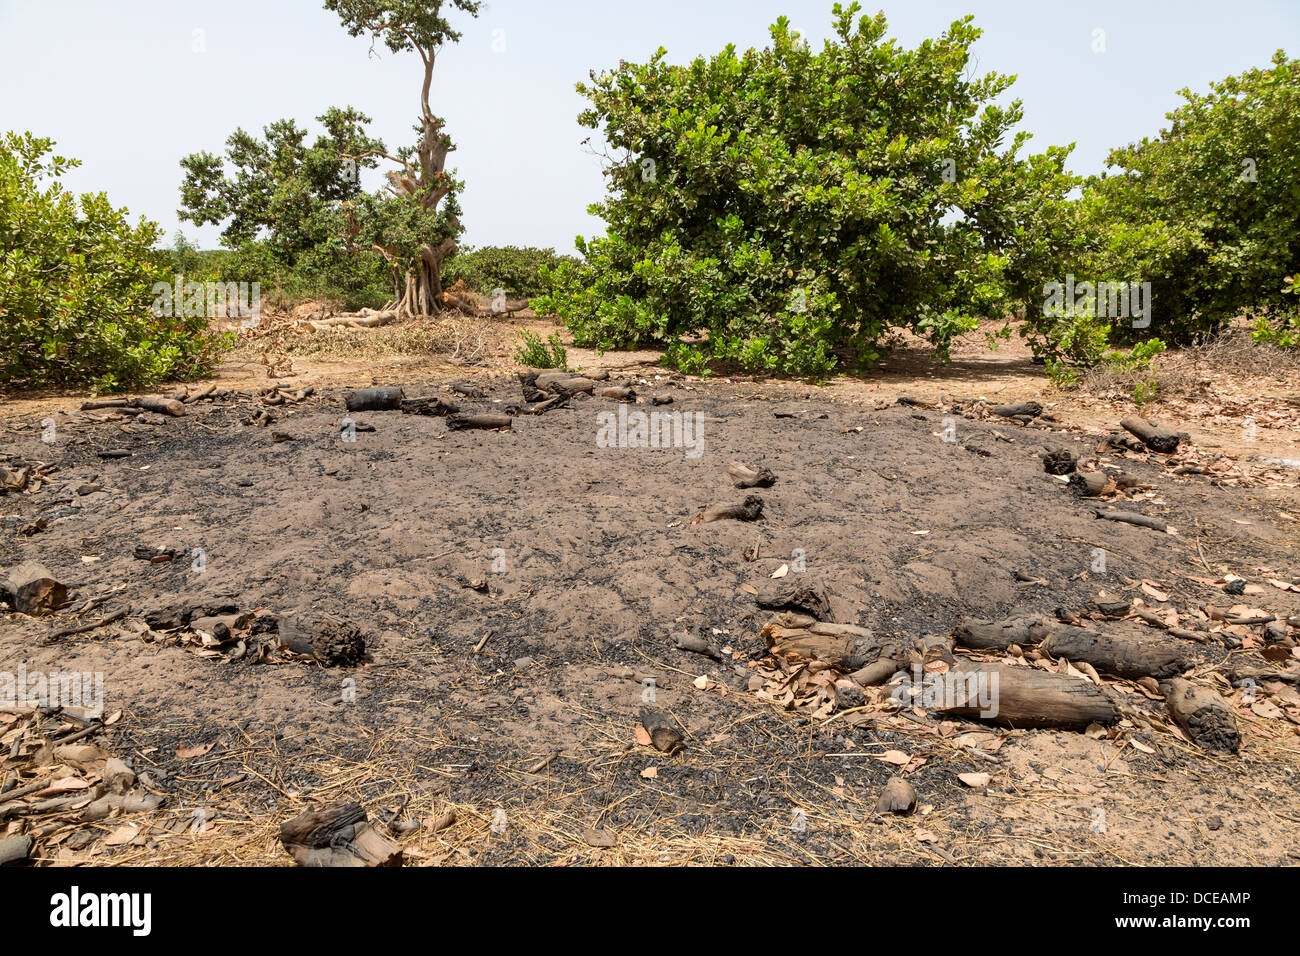 Cashew Tree Farm.  Foreground shows site of a tree recently cut down and converted to charcoal. Stock Photo